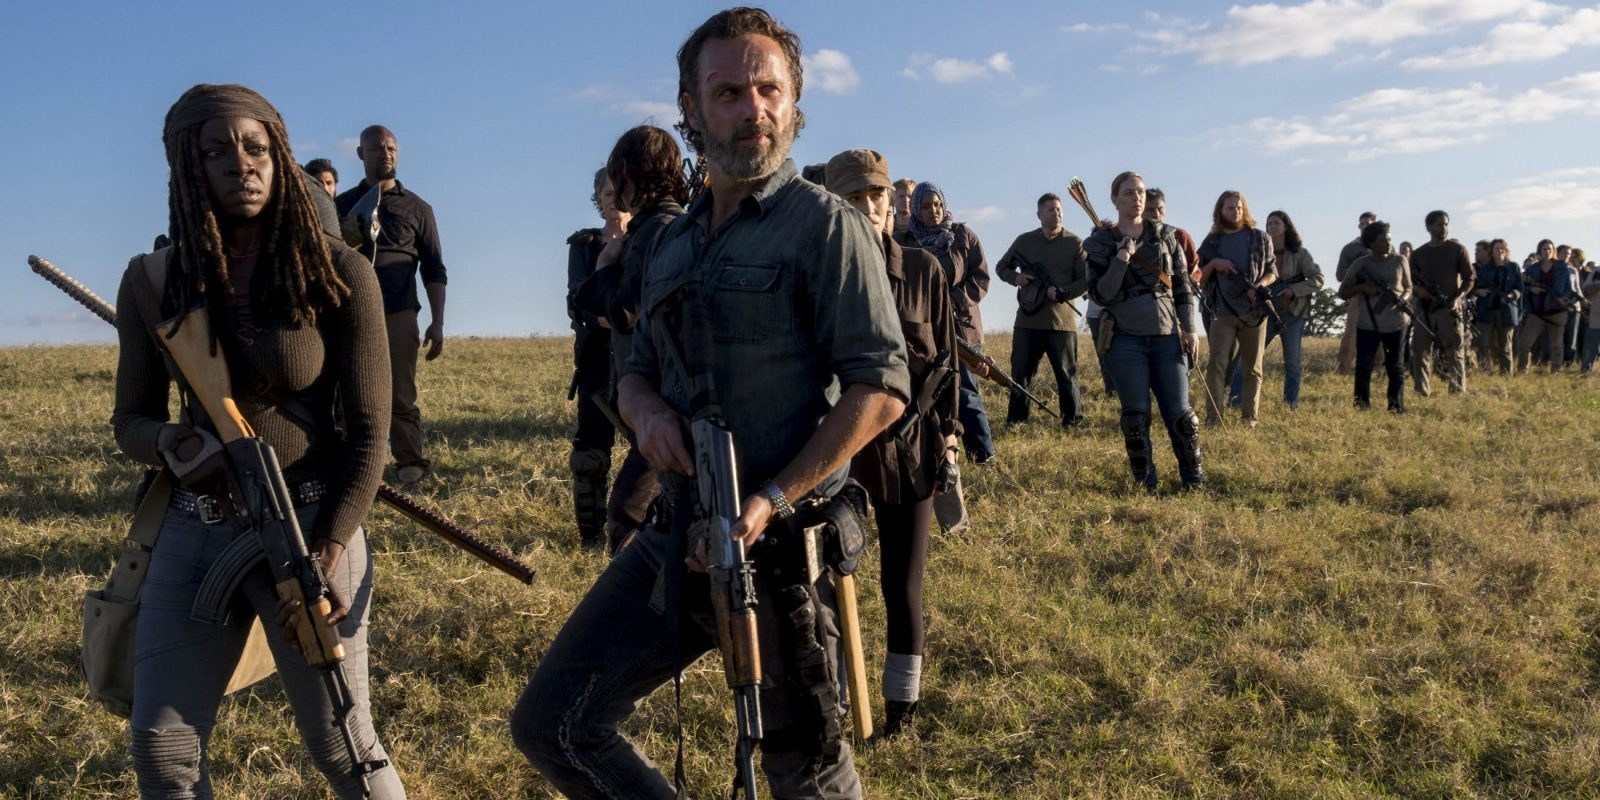 Anyone With the Most Basic TV Knowledge Should Get 12/15 on This Quiz The Walking Dead